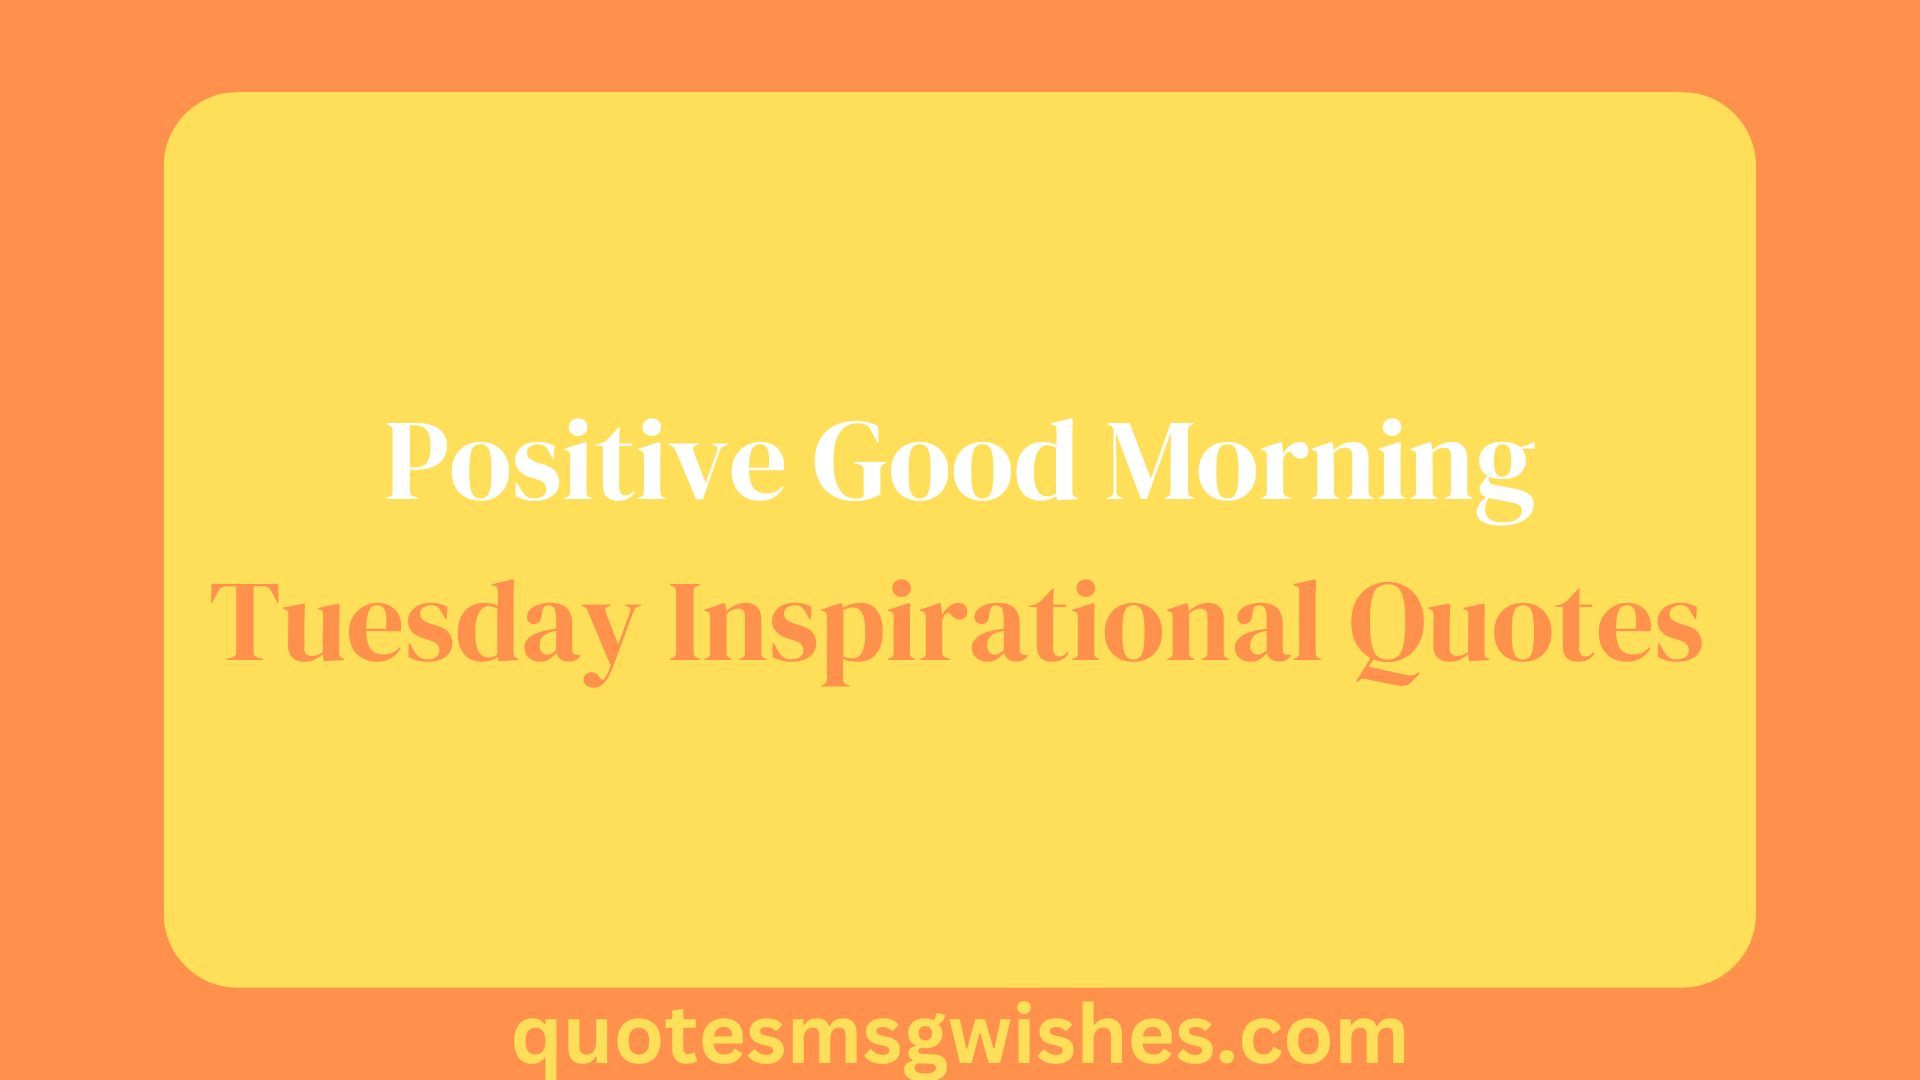 Positive Good Morning Tuesday Inspirational Quotes